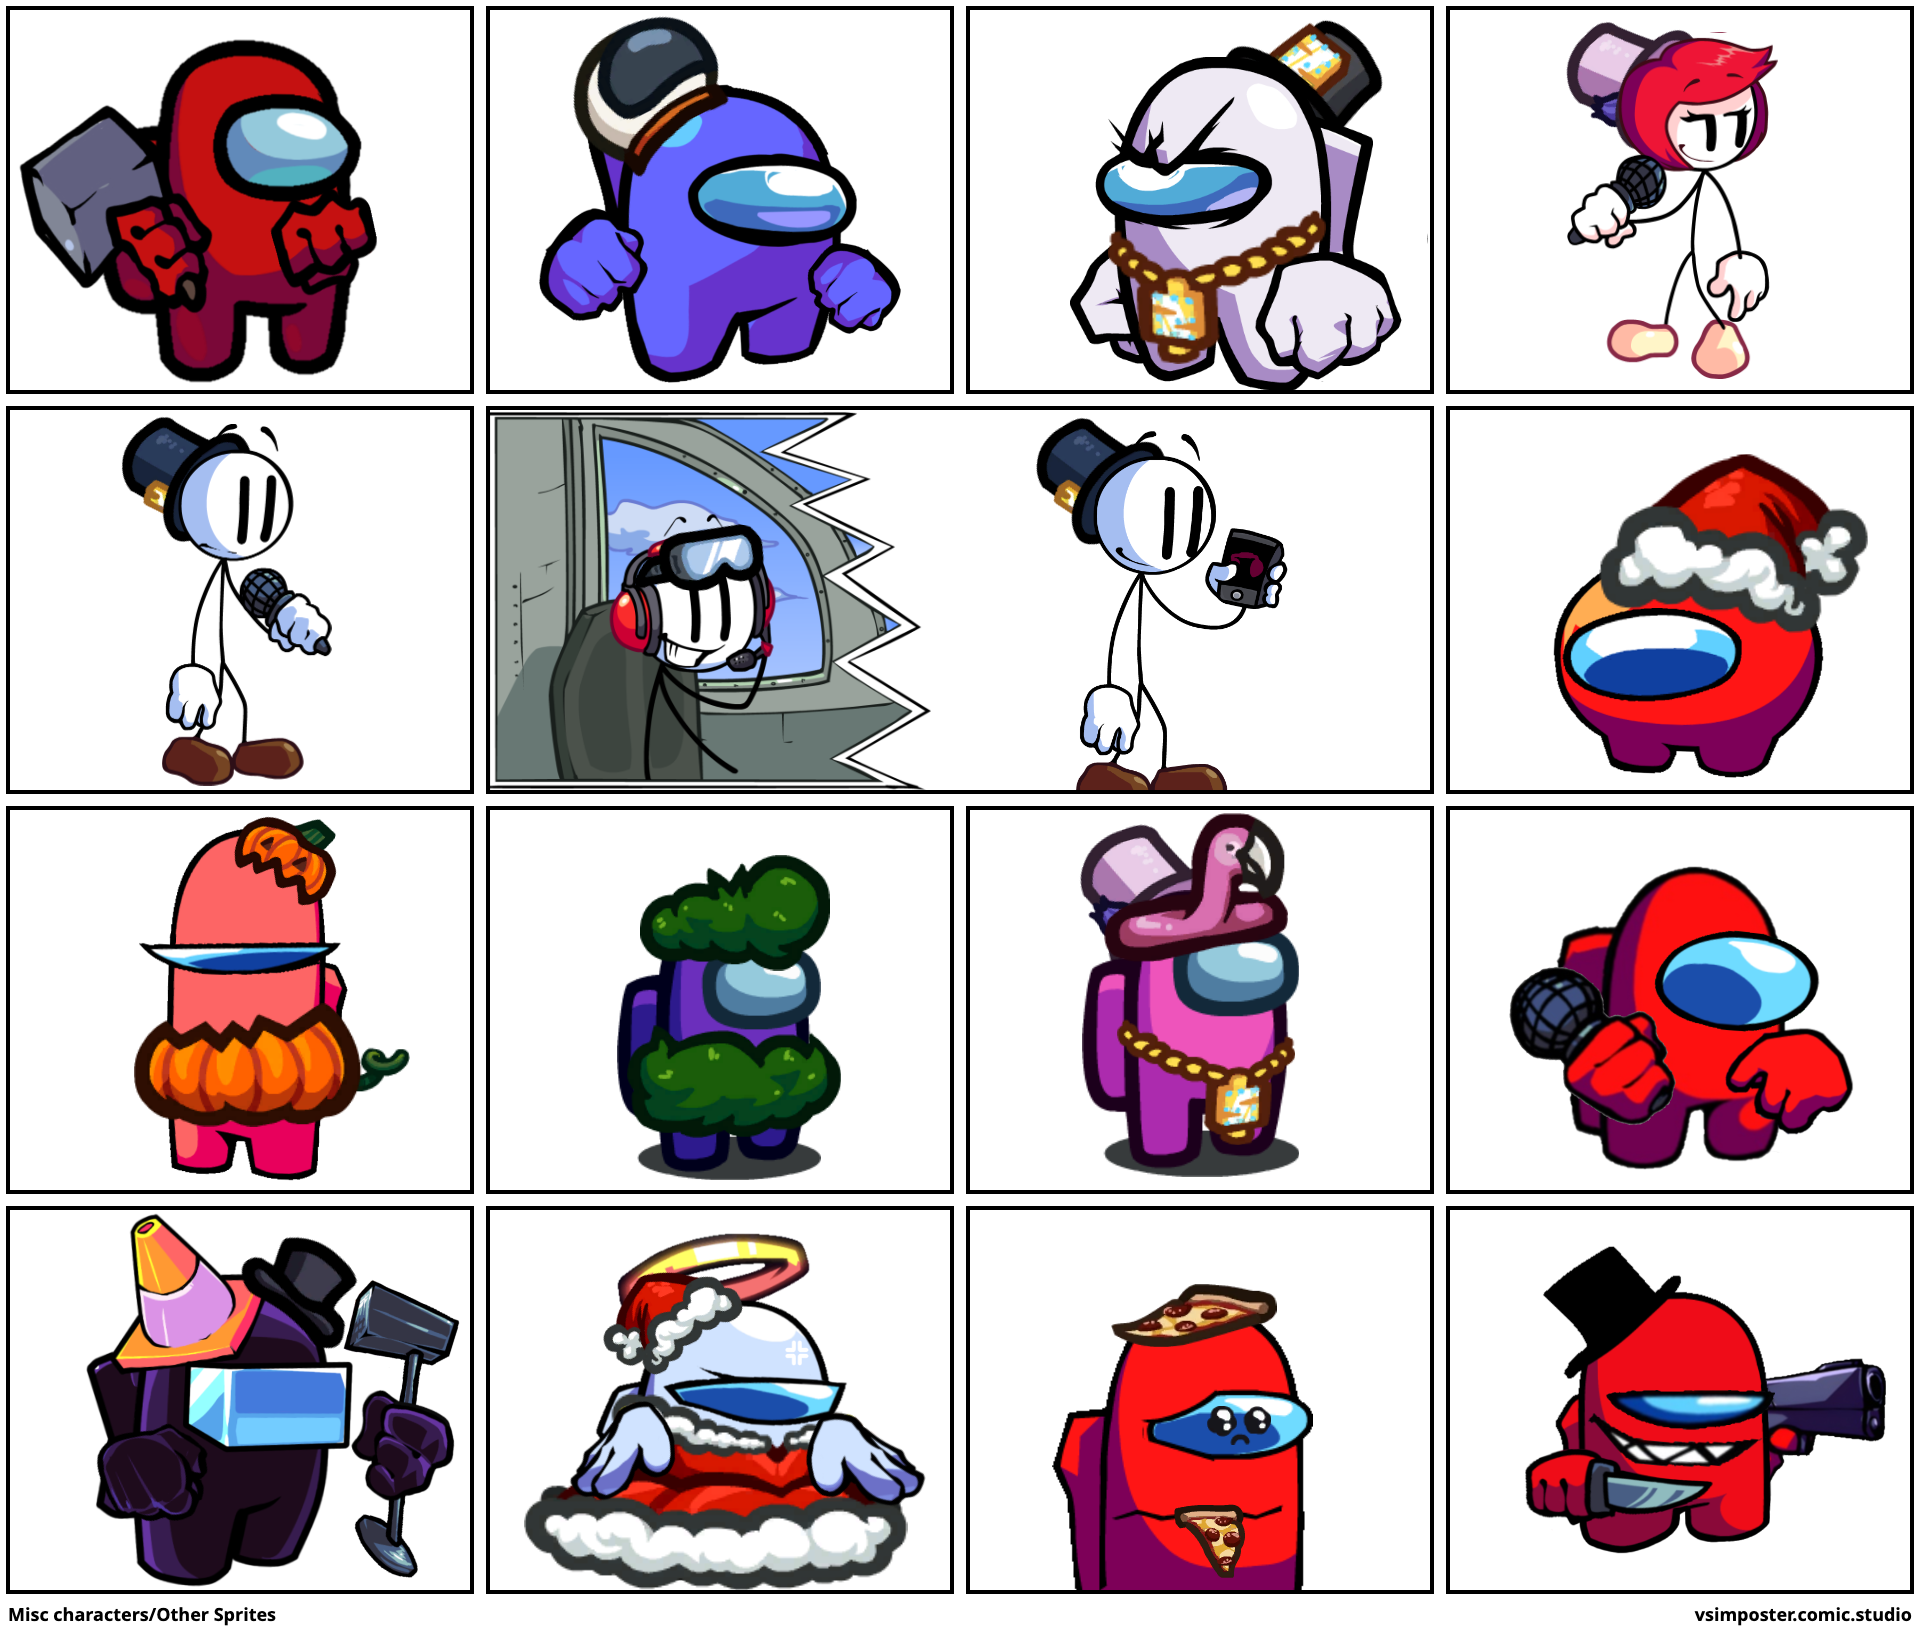 Misc characters/Other Sprites